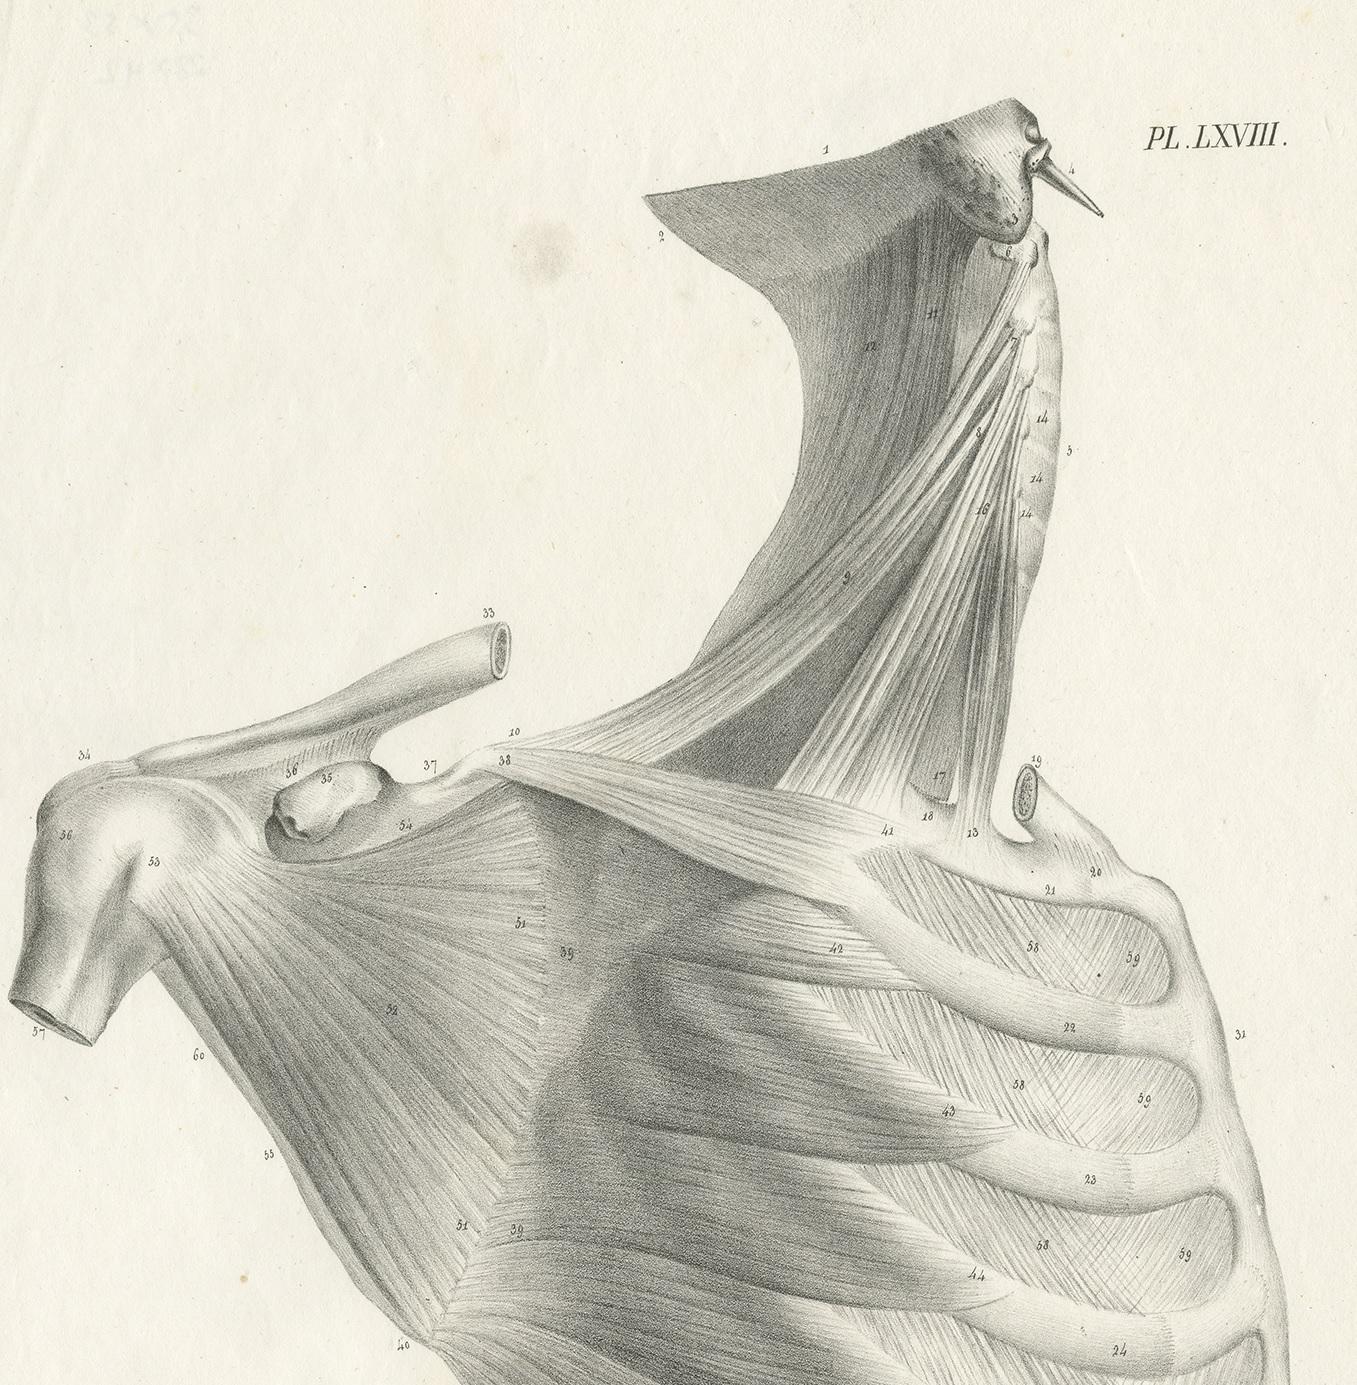 Engraved Pl. LXVIII Antique Anatomy / Medical Print of the Rib Cage by Cloquet, '1821' For Sale